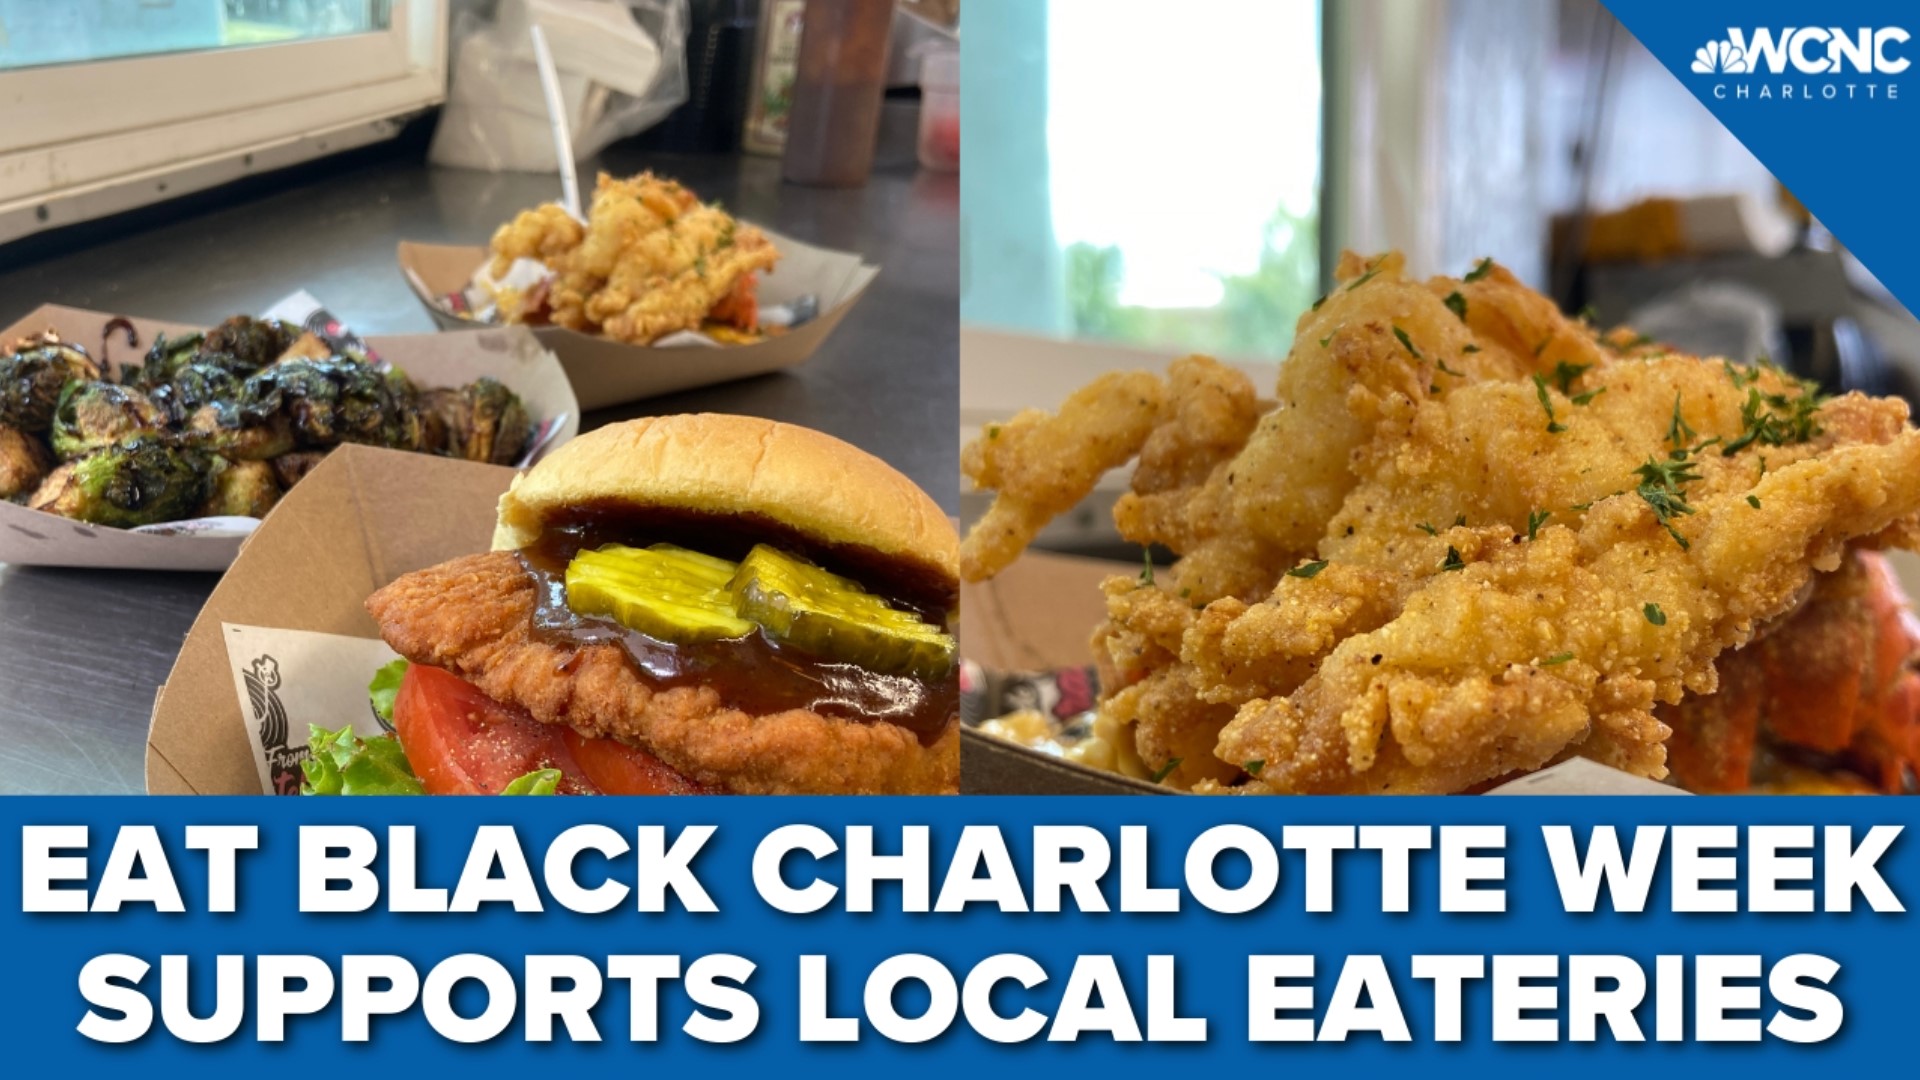 The second year of Eat Black Charlotte was a success. That's according to several Black-owned businesses that took part in the week-long event.